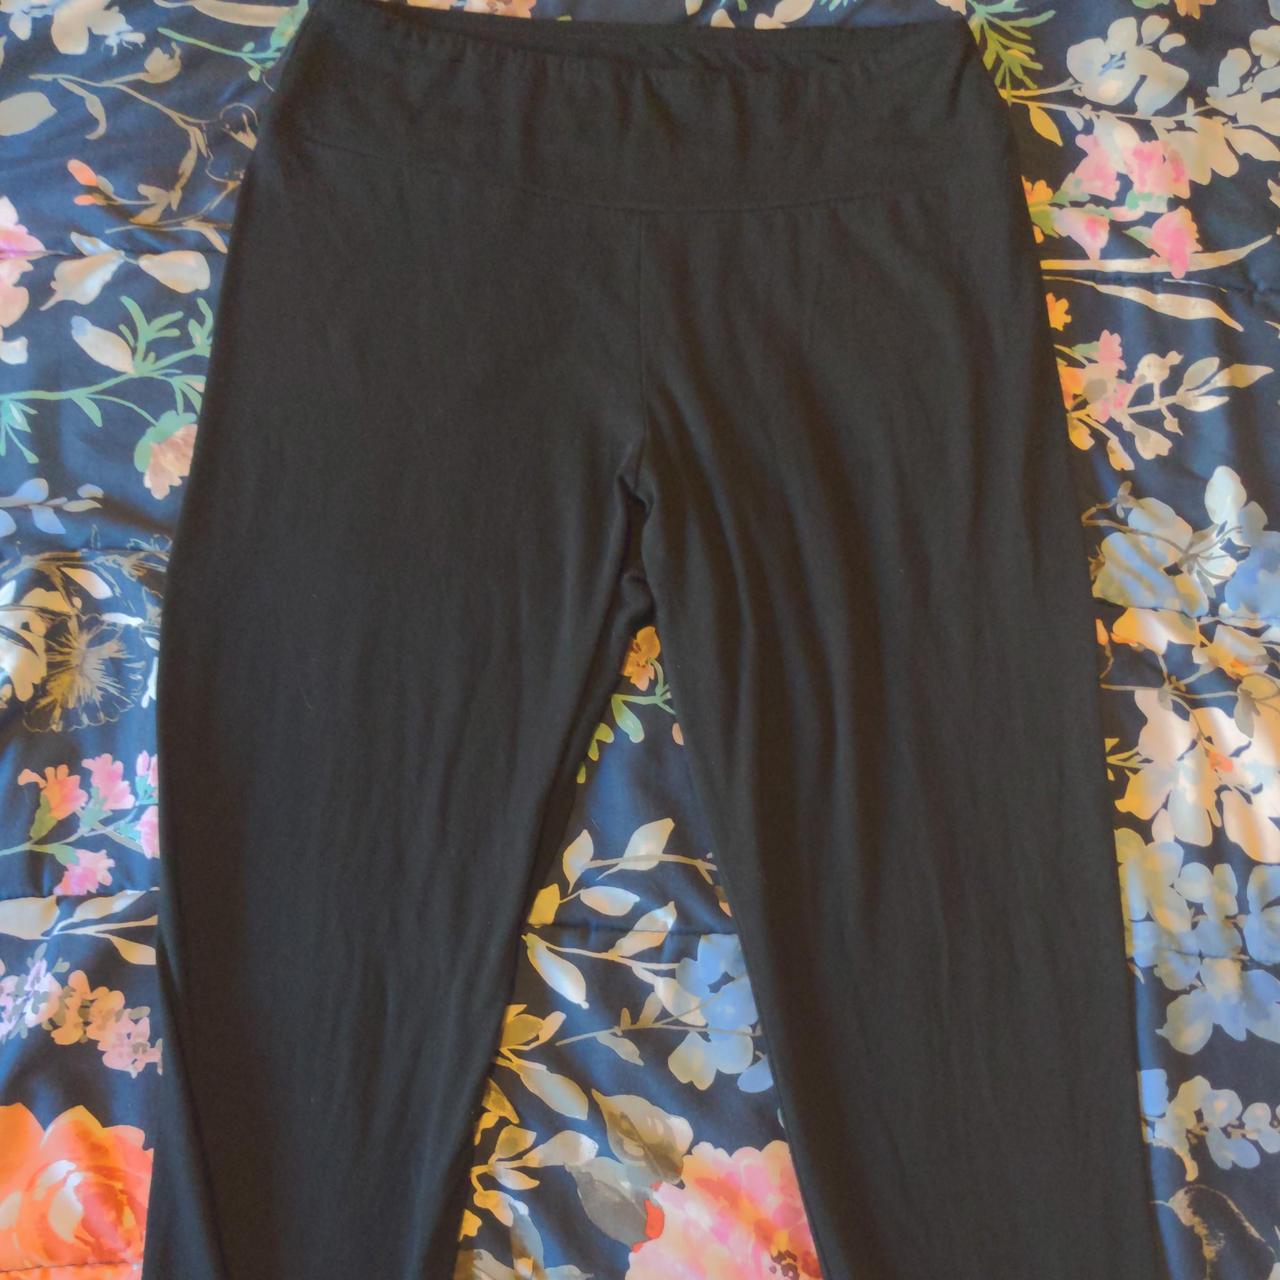 Cotton wild fable target leggings, thin material but - Depop